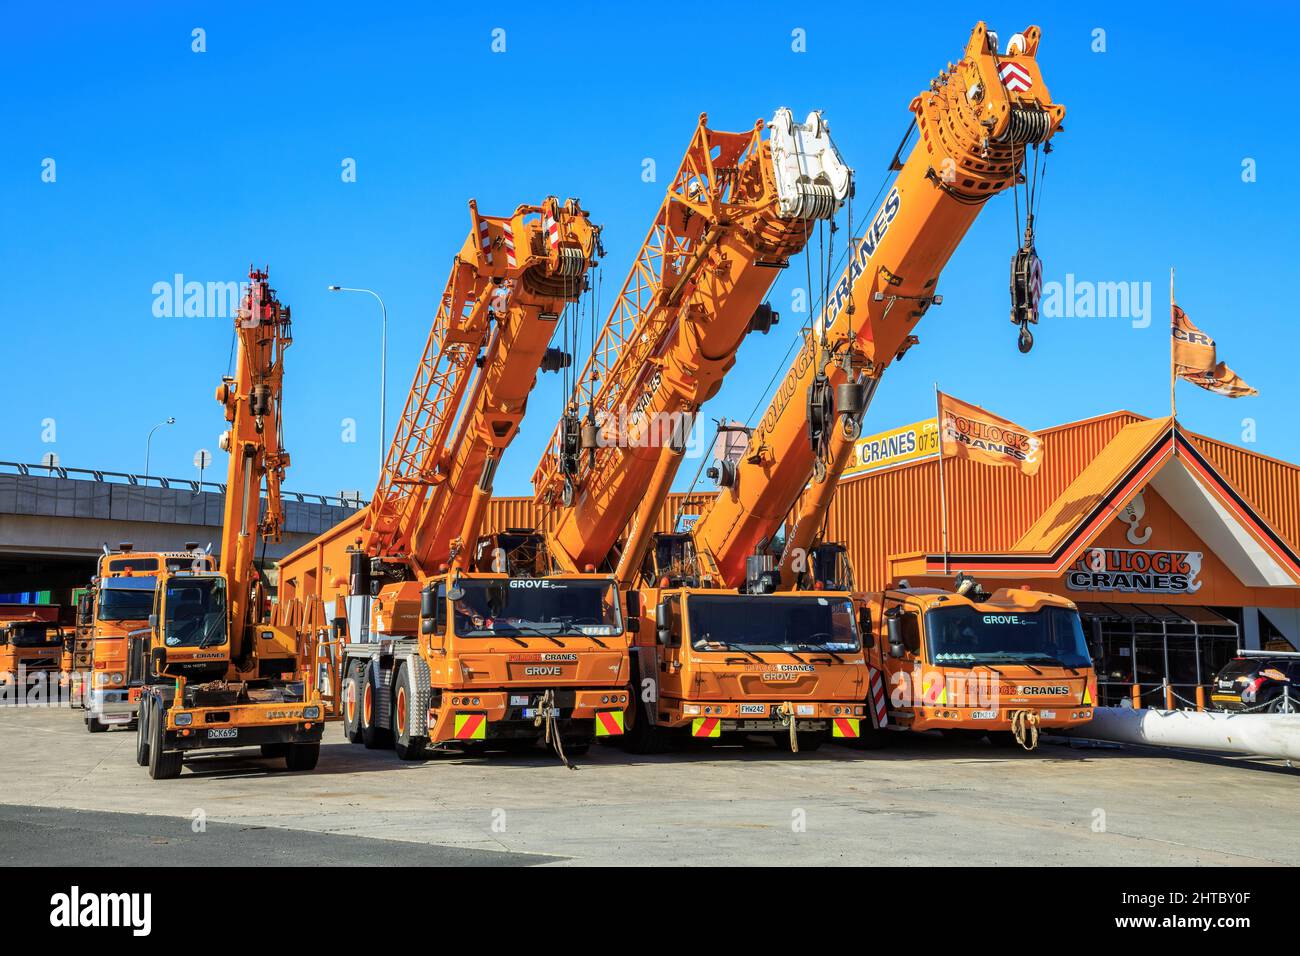 A row of Grove mobile cranes outside a hire facility in Tauranga, New Zealand Stock Photo